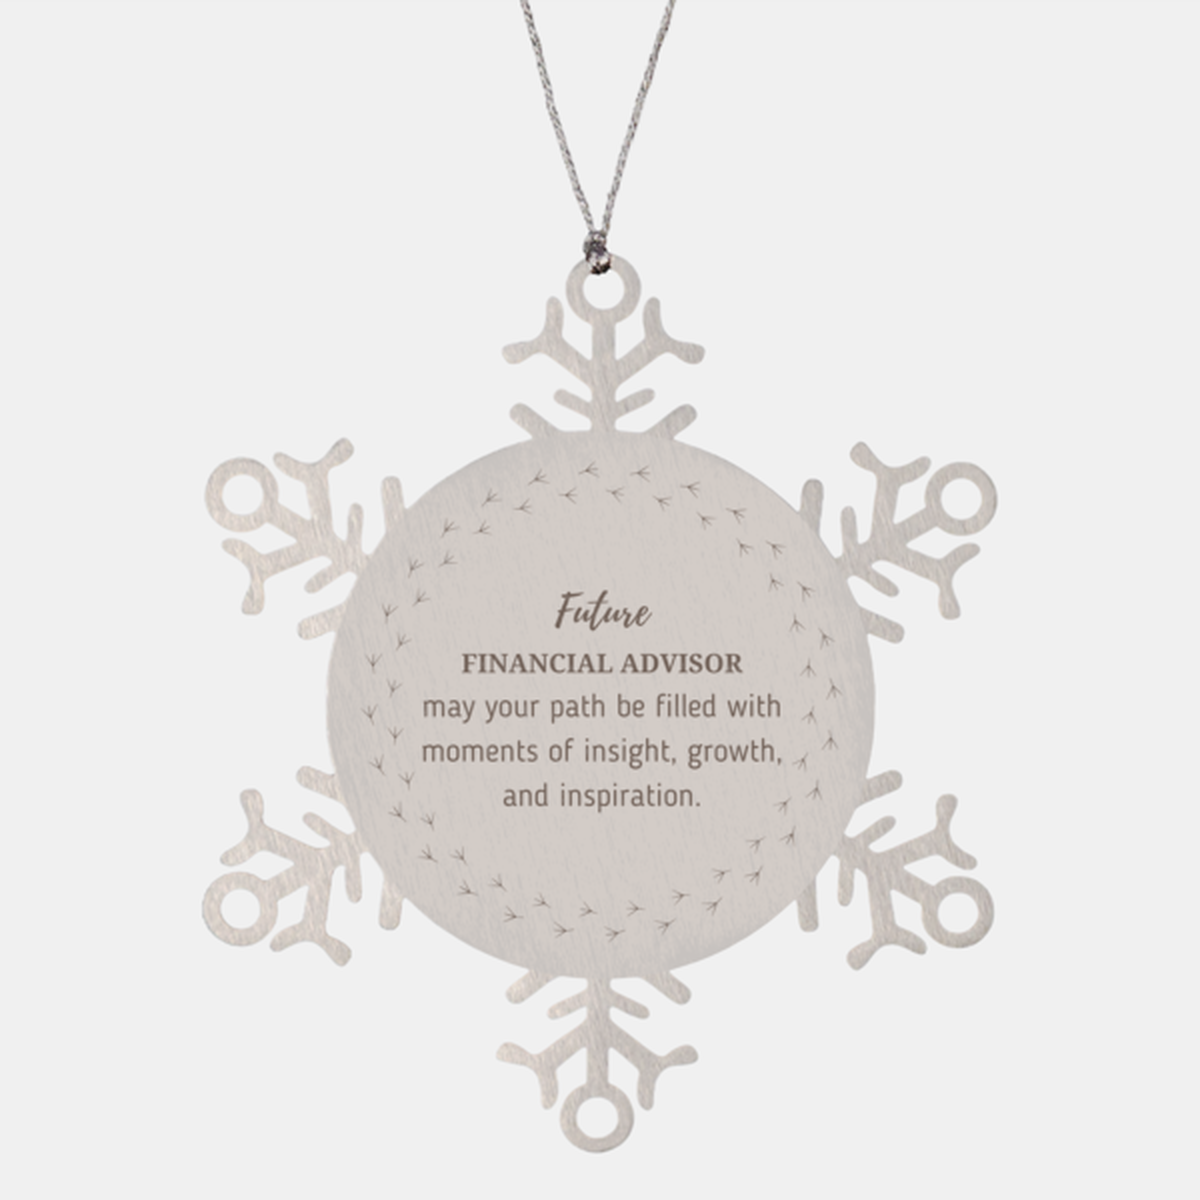 Future Financial Advisor Gifts, May your path be filled with moments of insight, Graduation Gifts for New Financial Advisor, Christmas Unique Snowflake Ornament For Men, Women, Friends